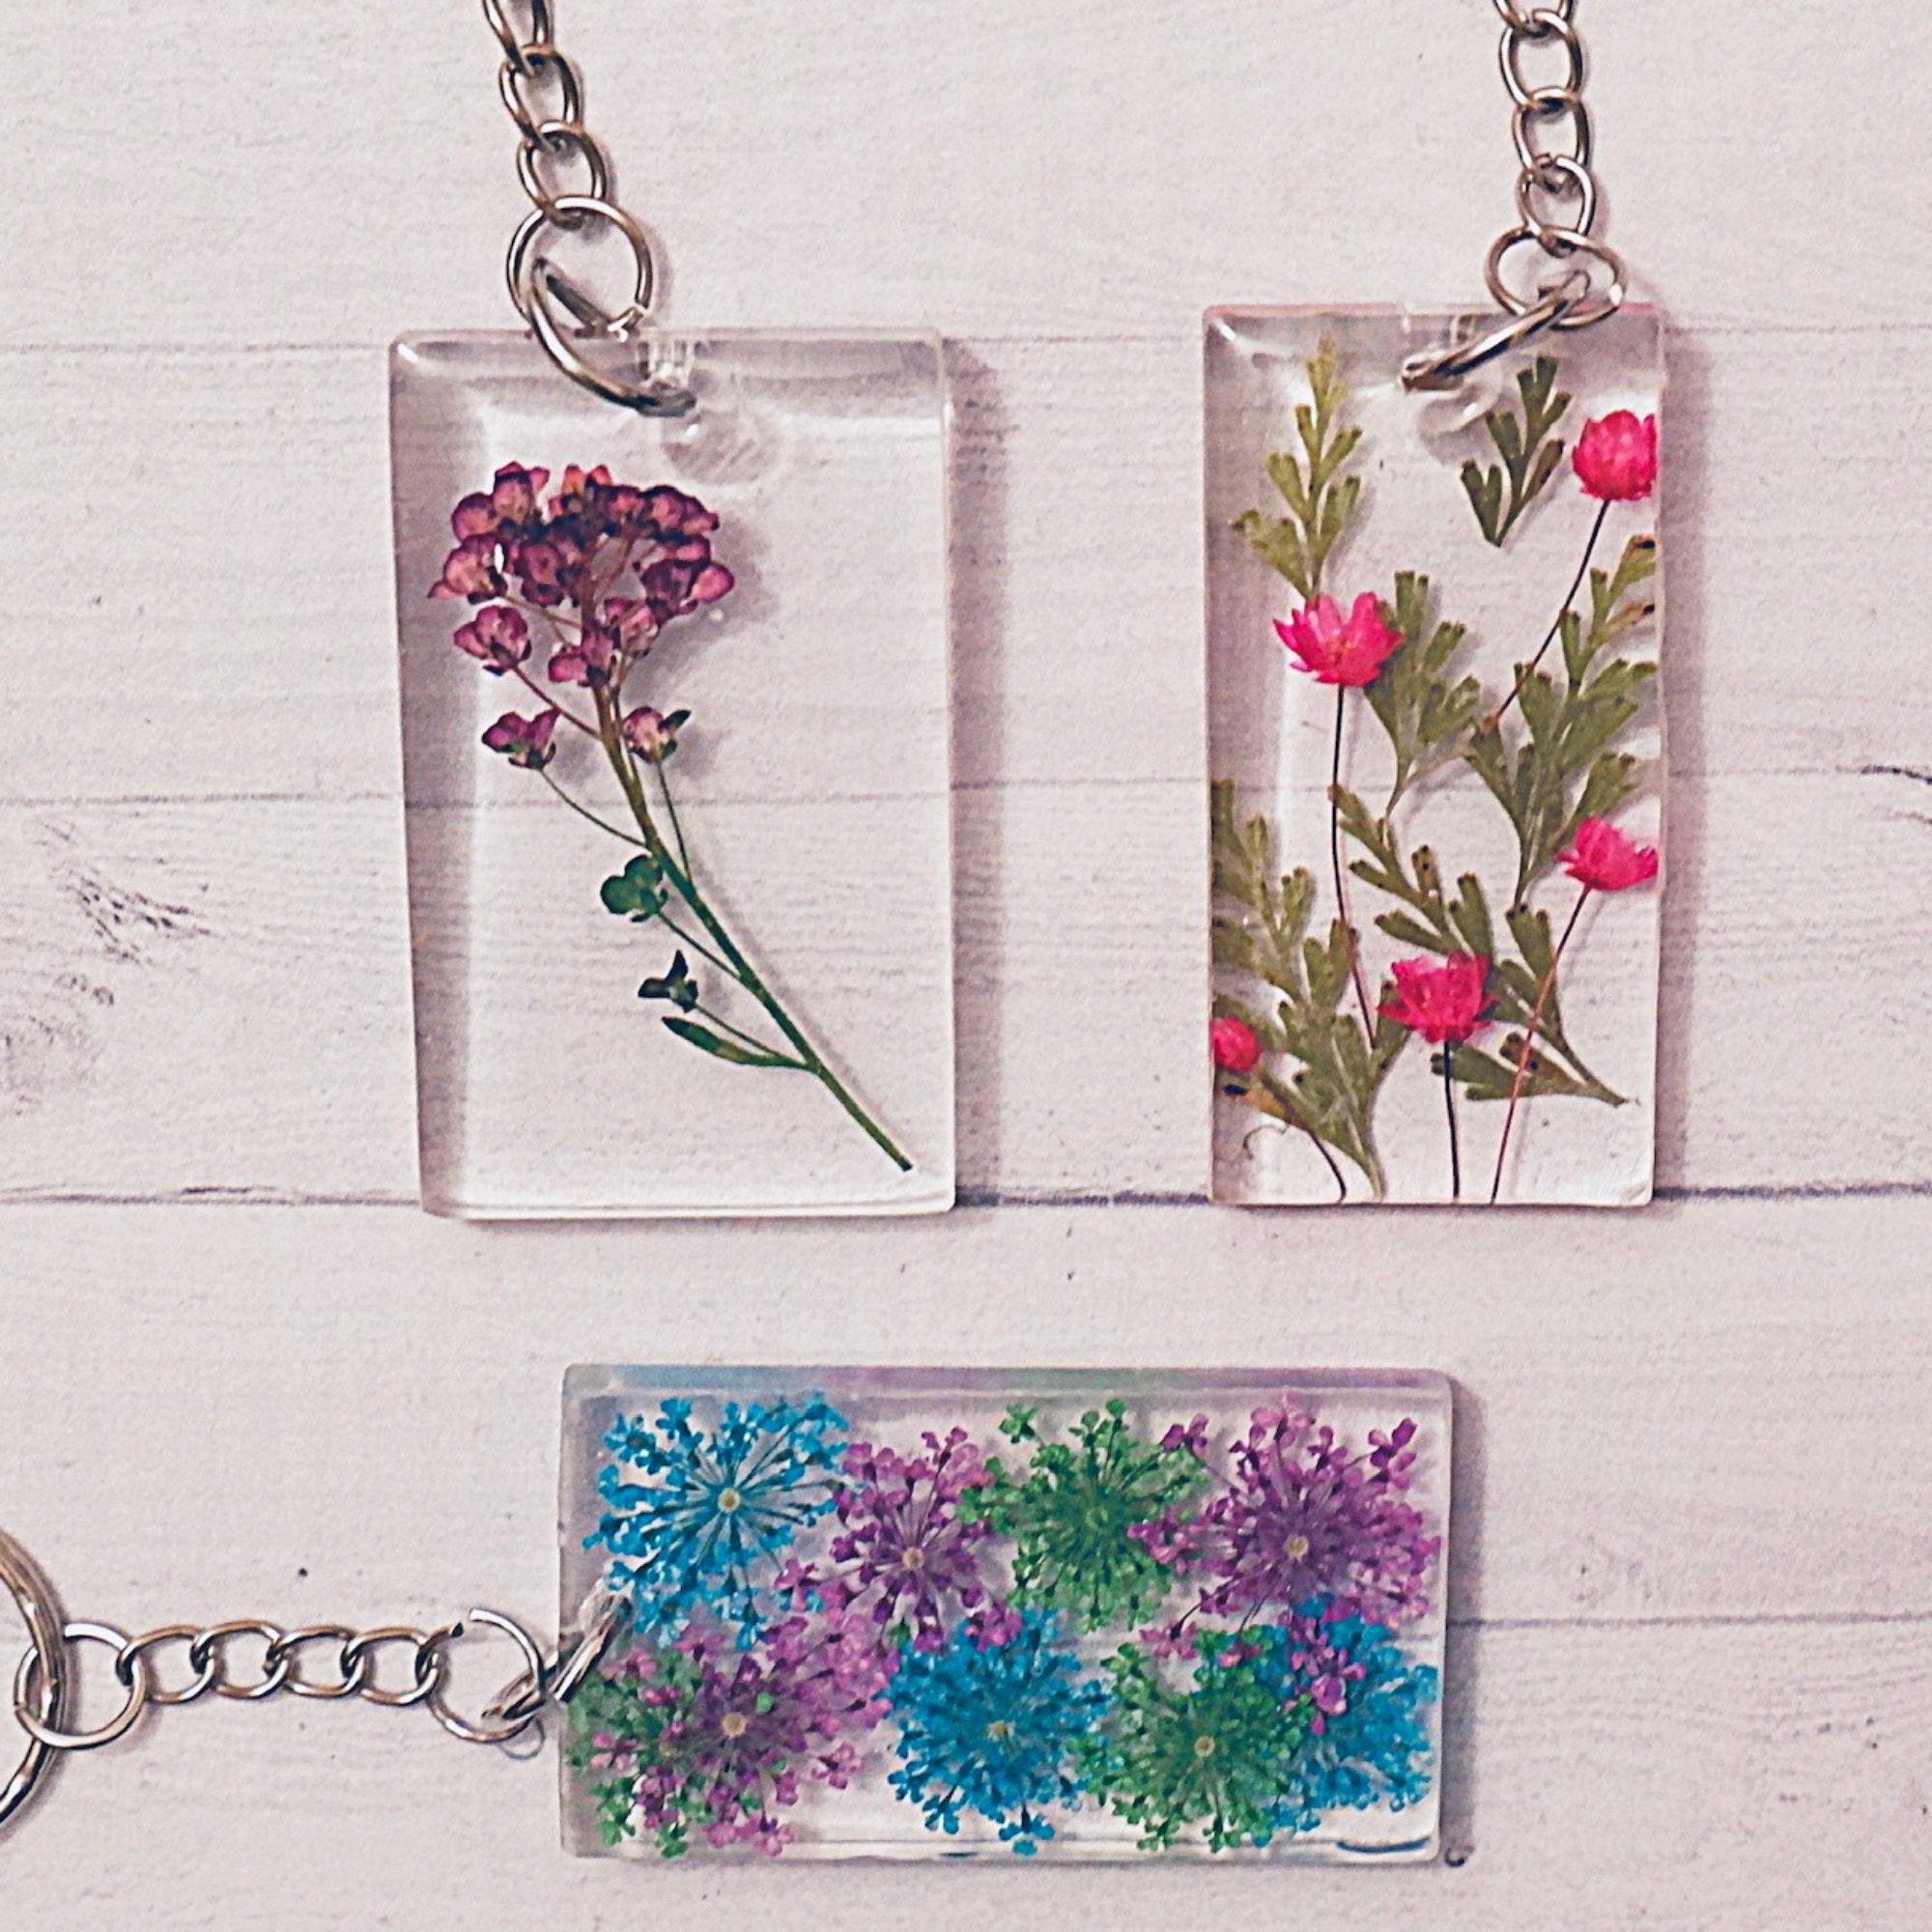 Pink and blue keychain, real pressed flower, flower keychain